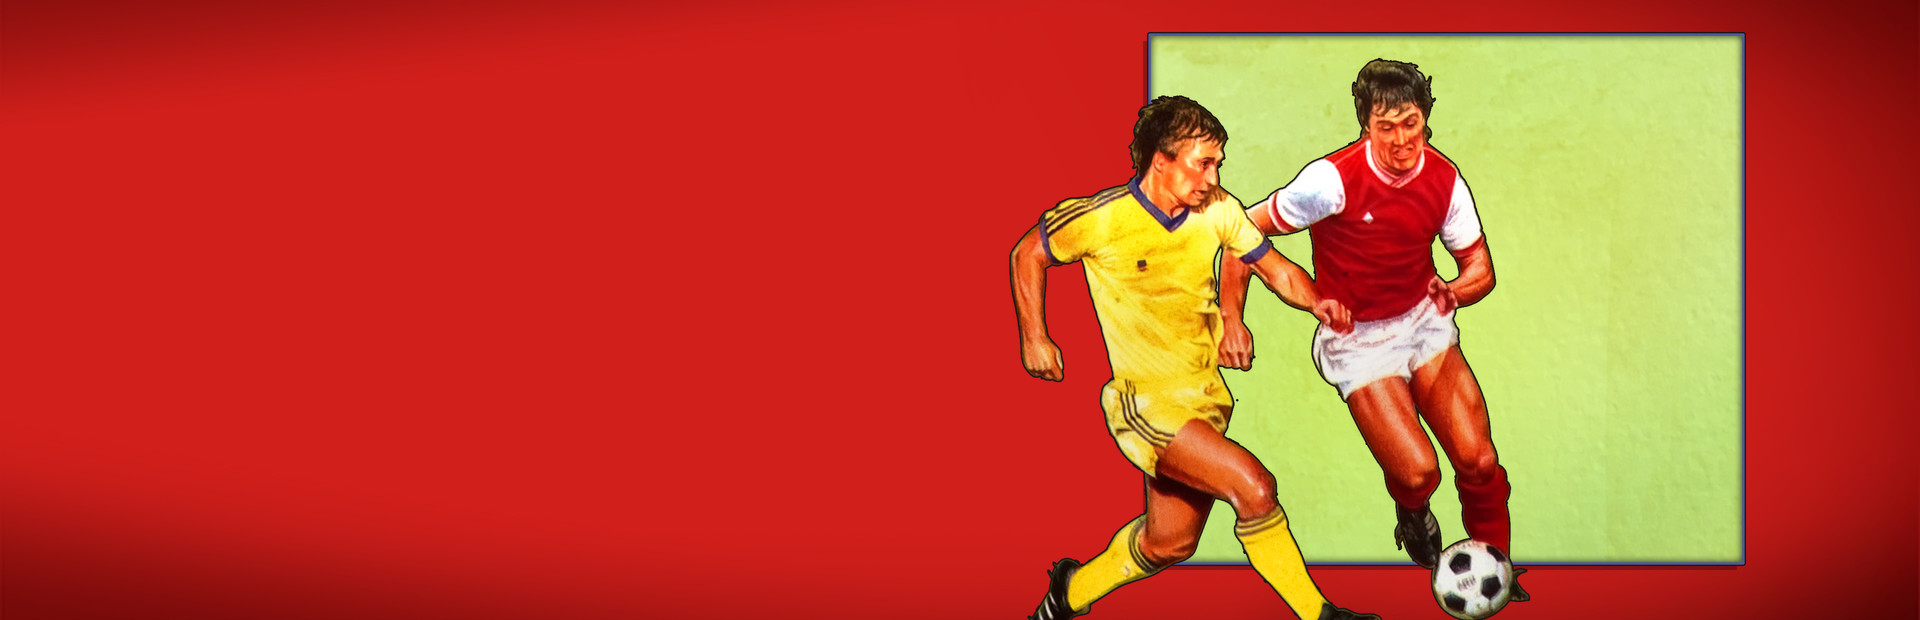 MicroProse™ Soccer cover image